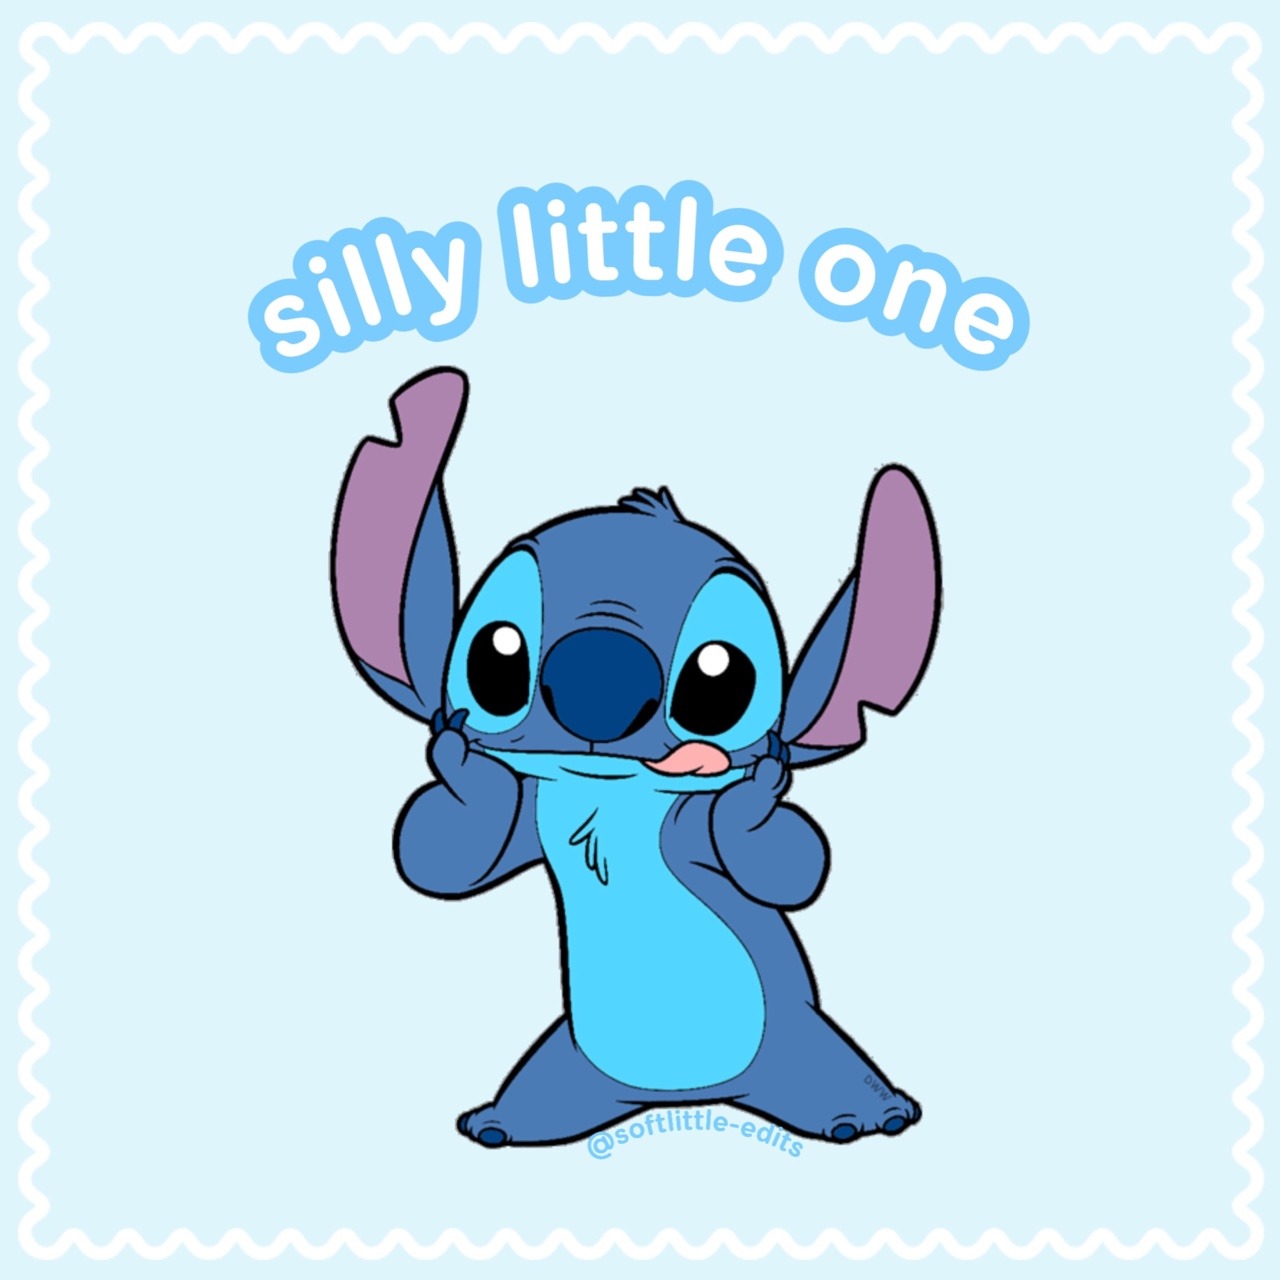 Prince Nugget — softlittle-edits: Hehe silly little stitch!